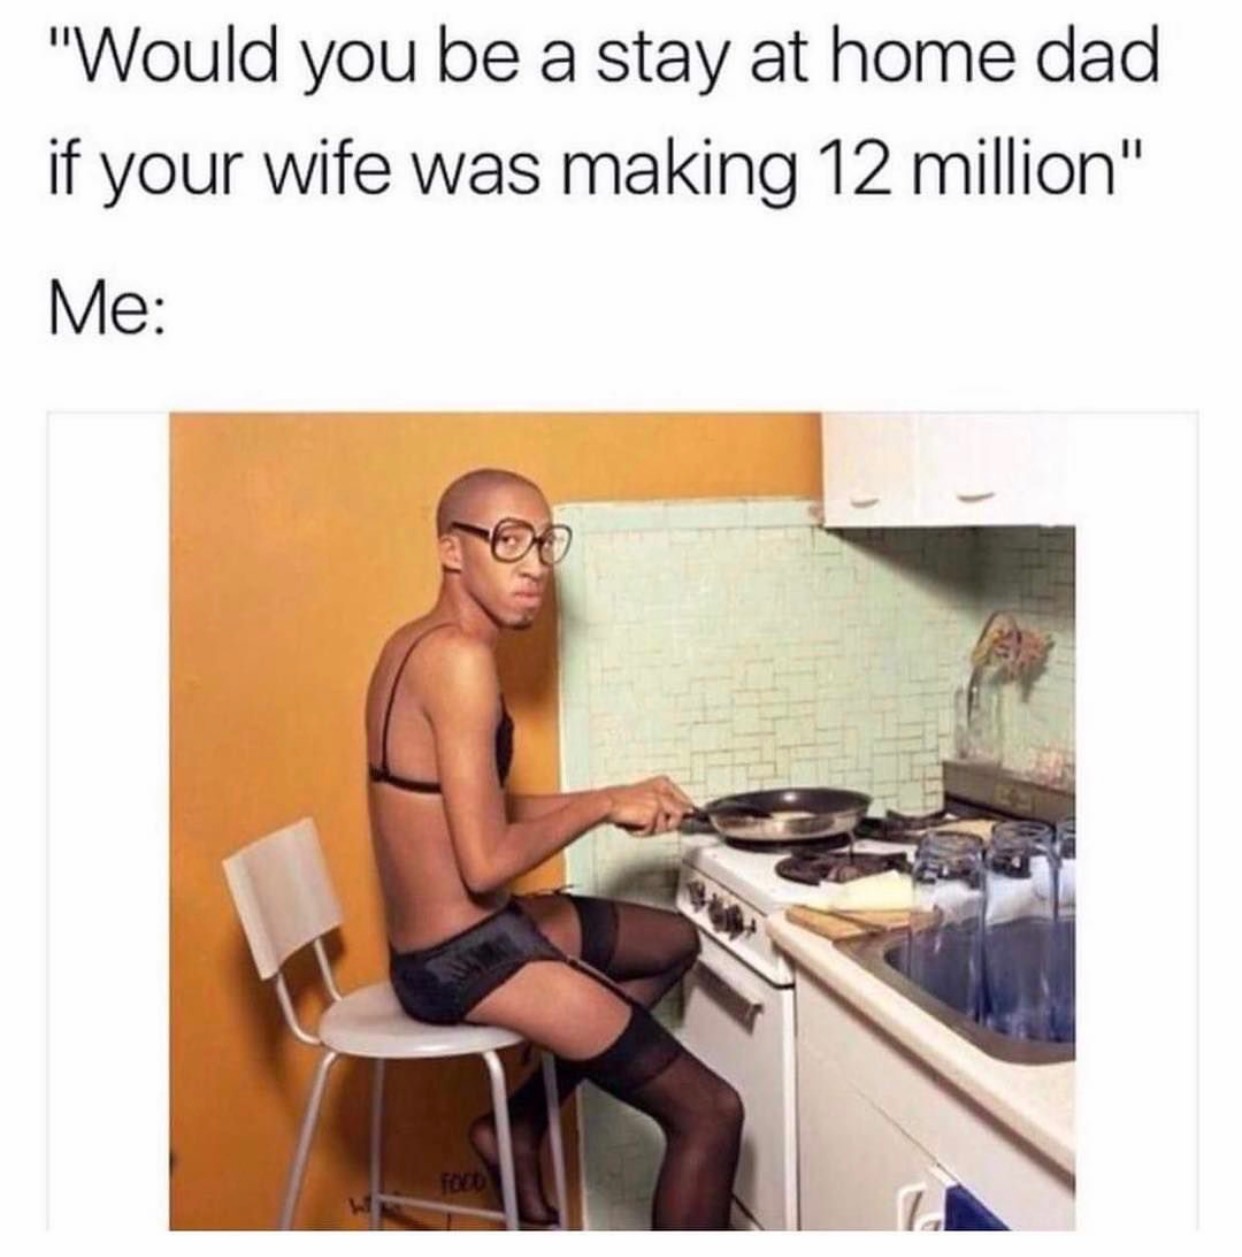 memes - stay at home dad funny - "Would you be a stay at home dad if your wife was making 12 million" Me Tolo